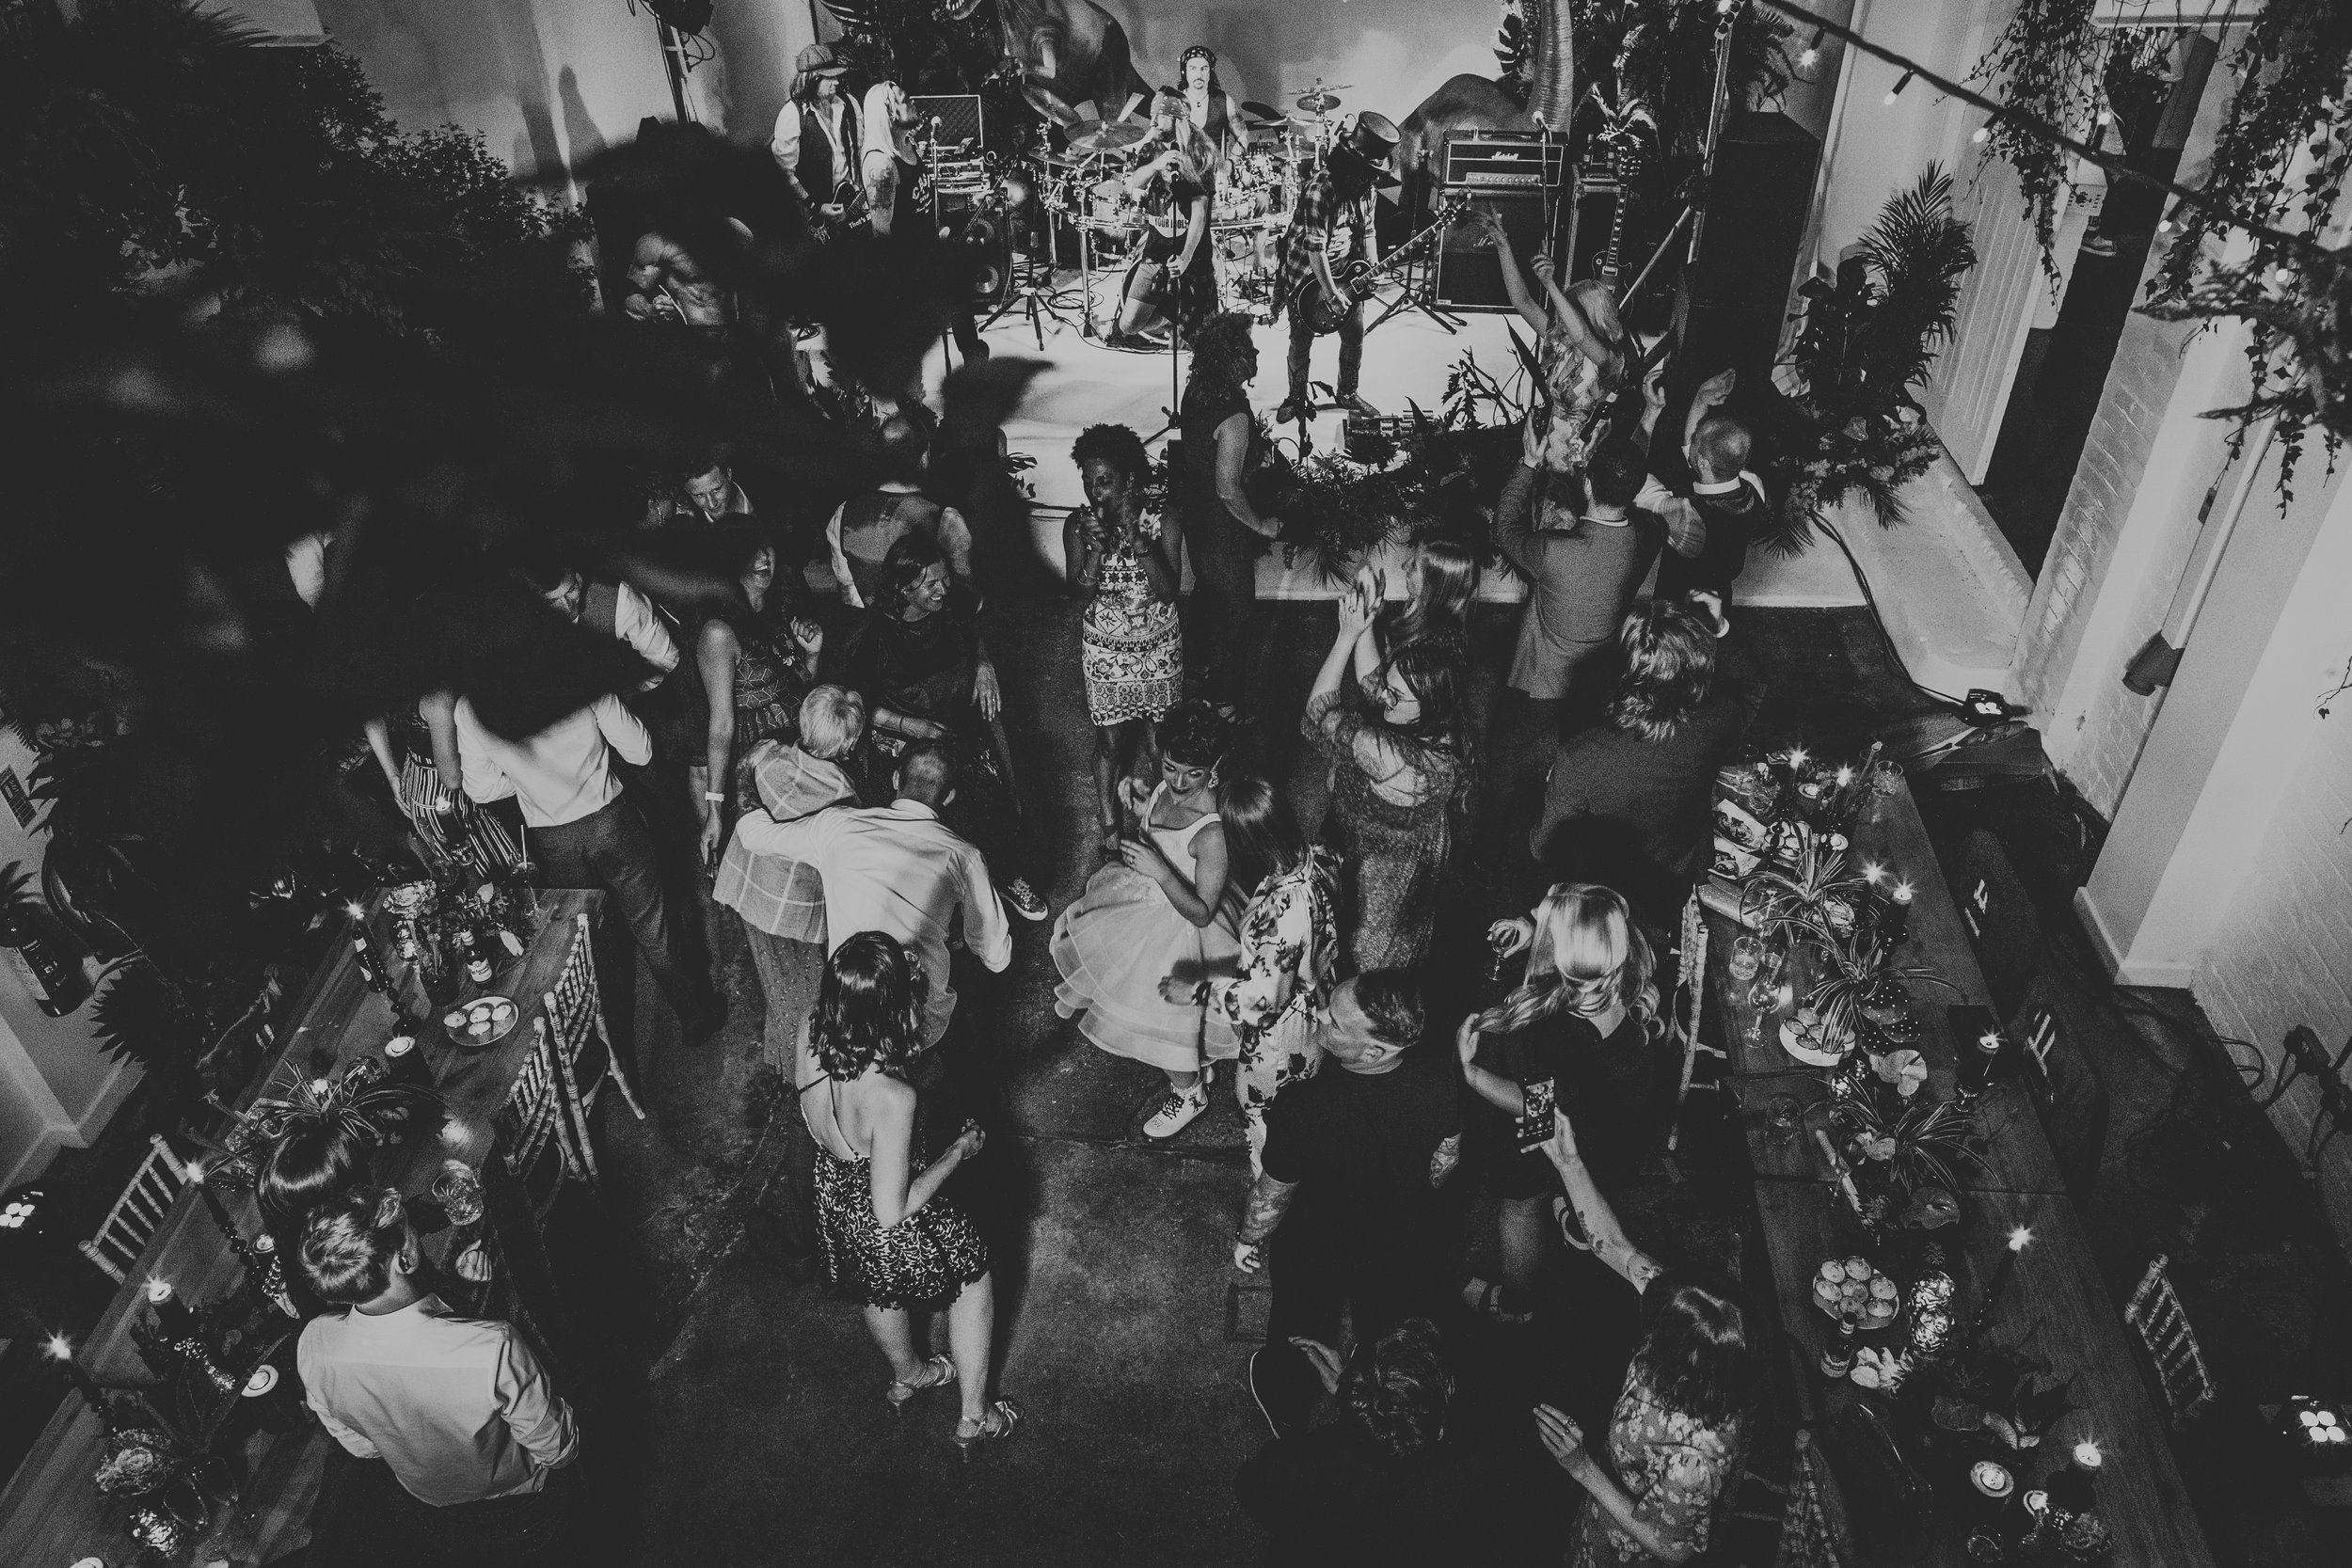 Ariel shot of everyone dancing on the dance floor in black and white. 